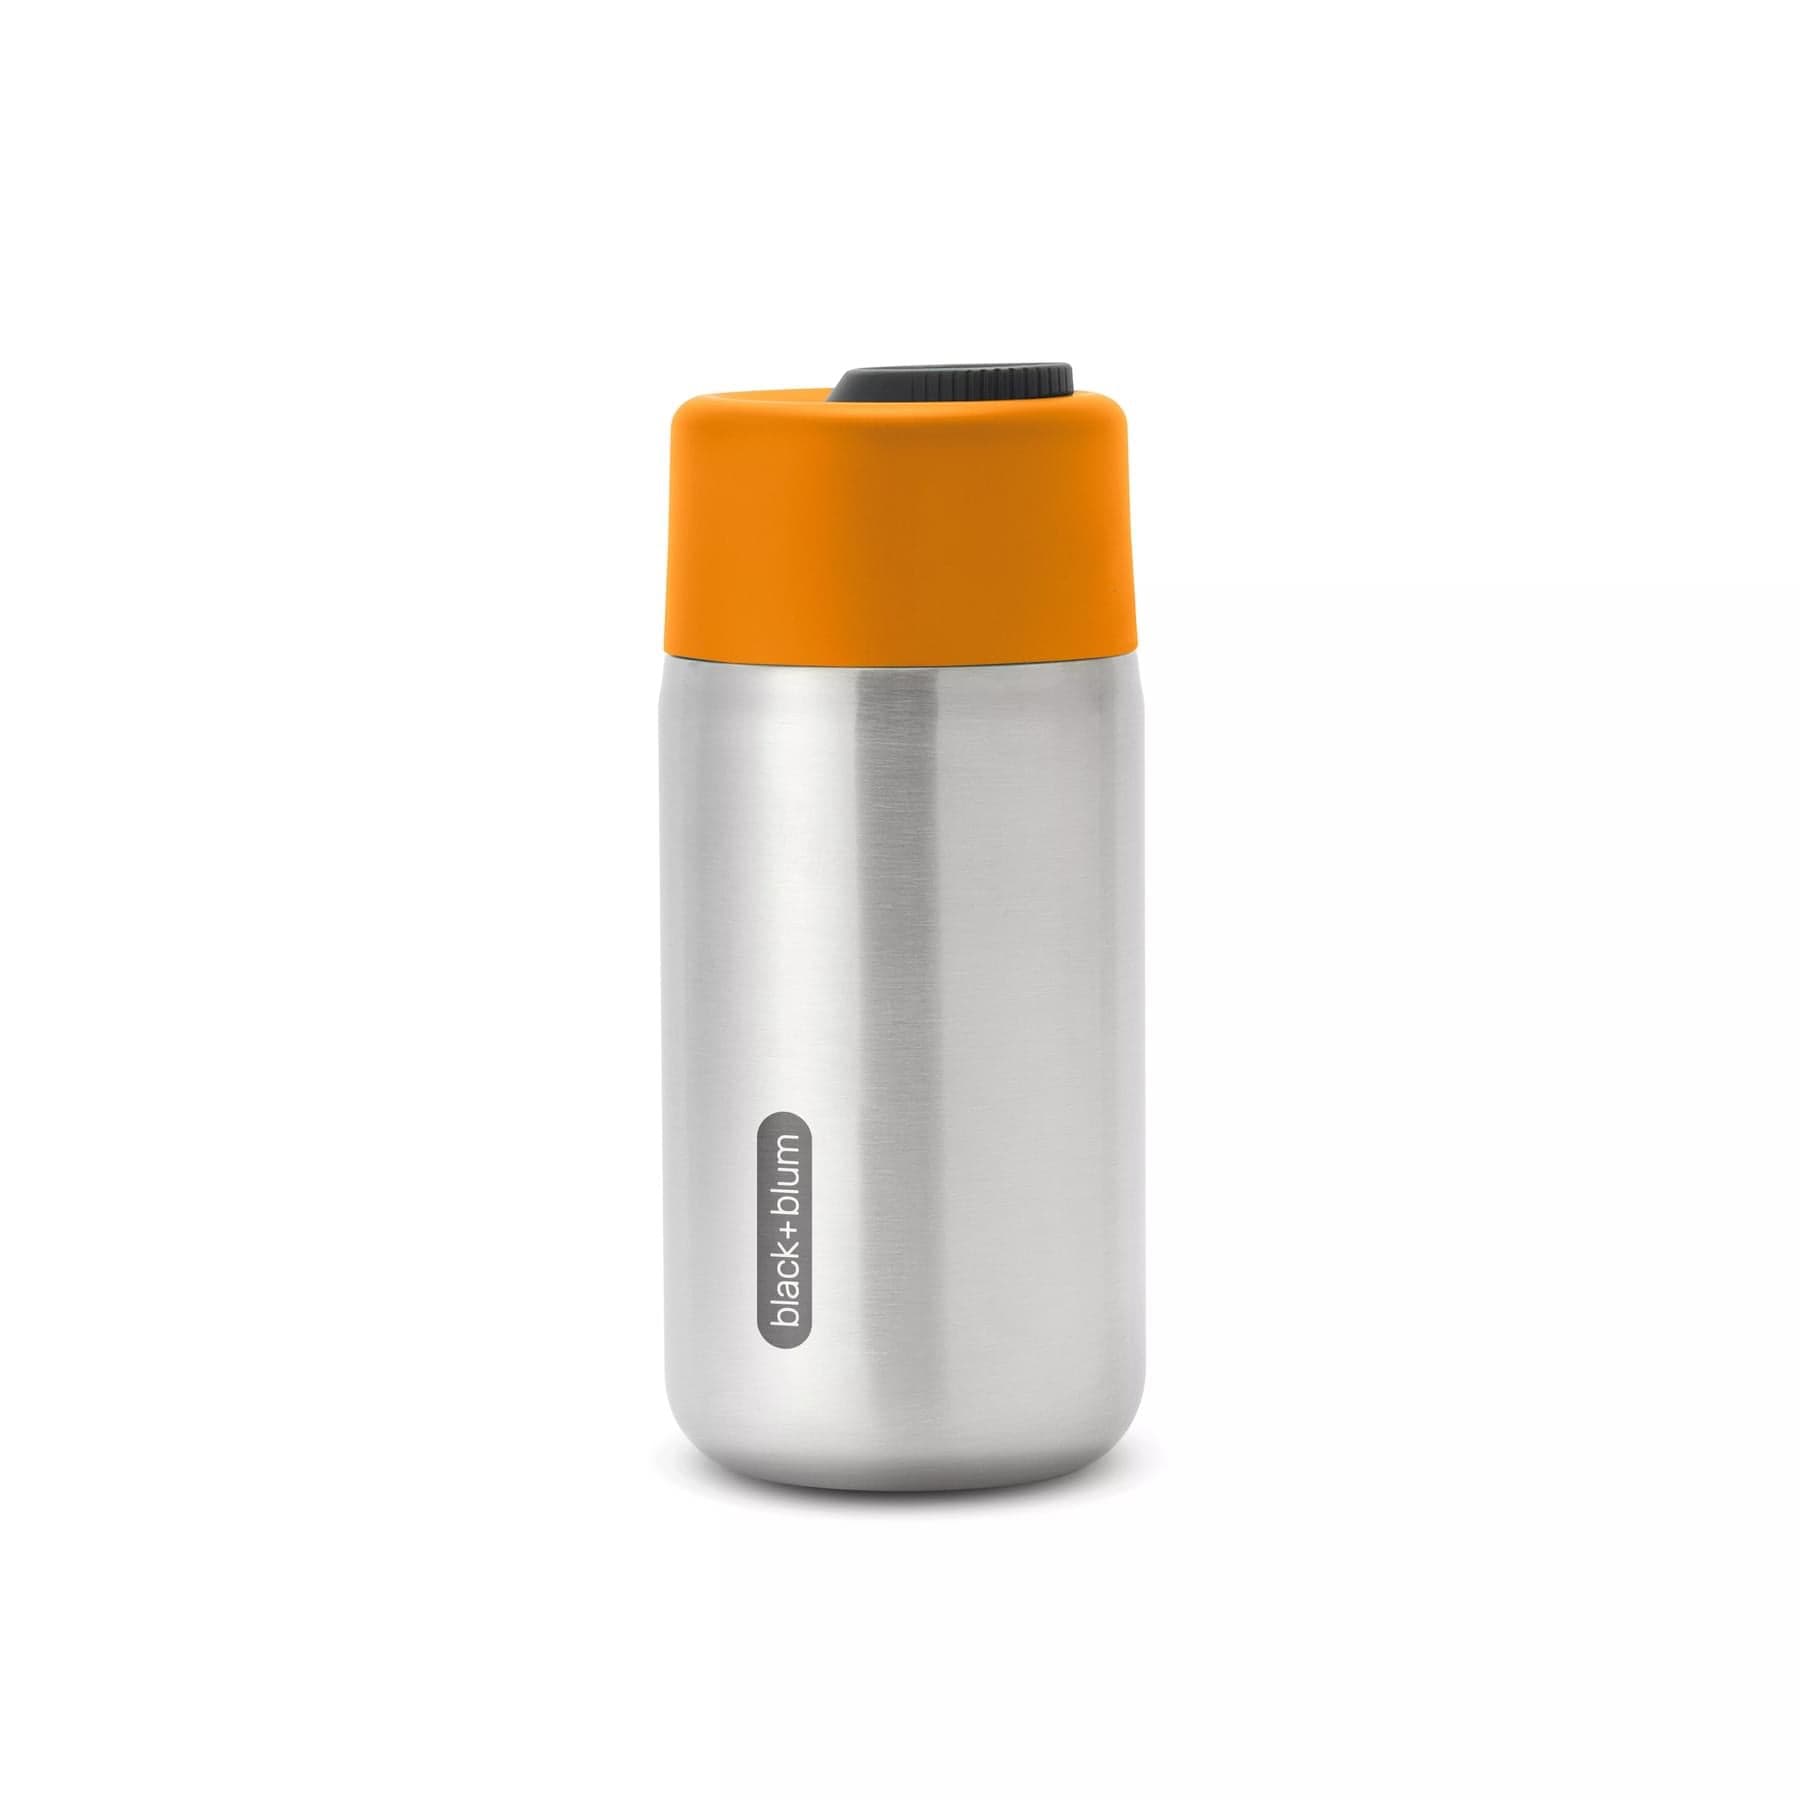 Stainless steel insulated water bottle with orange lid, Black+Blum brand, isolated on white background.